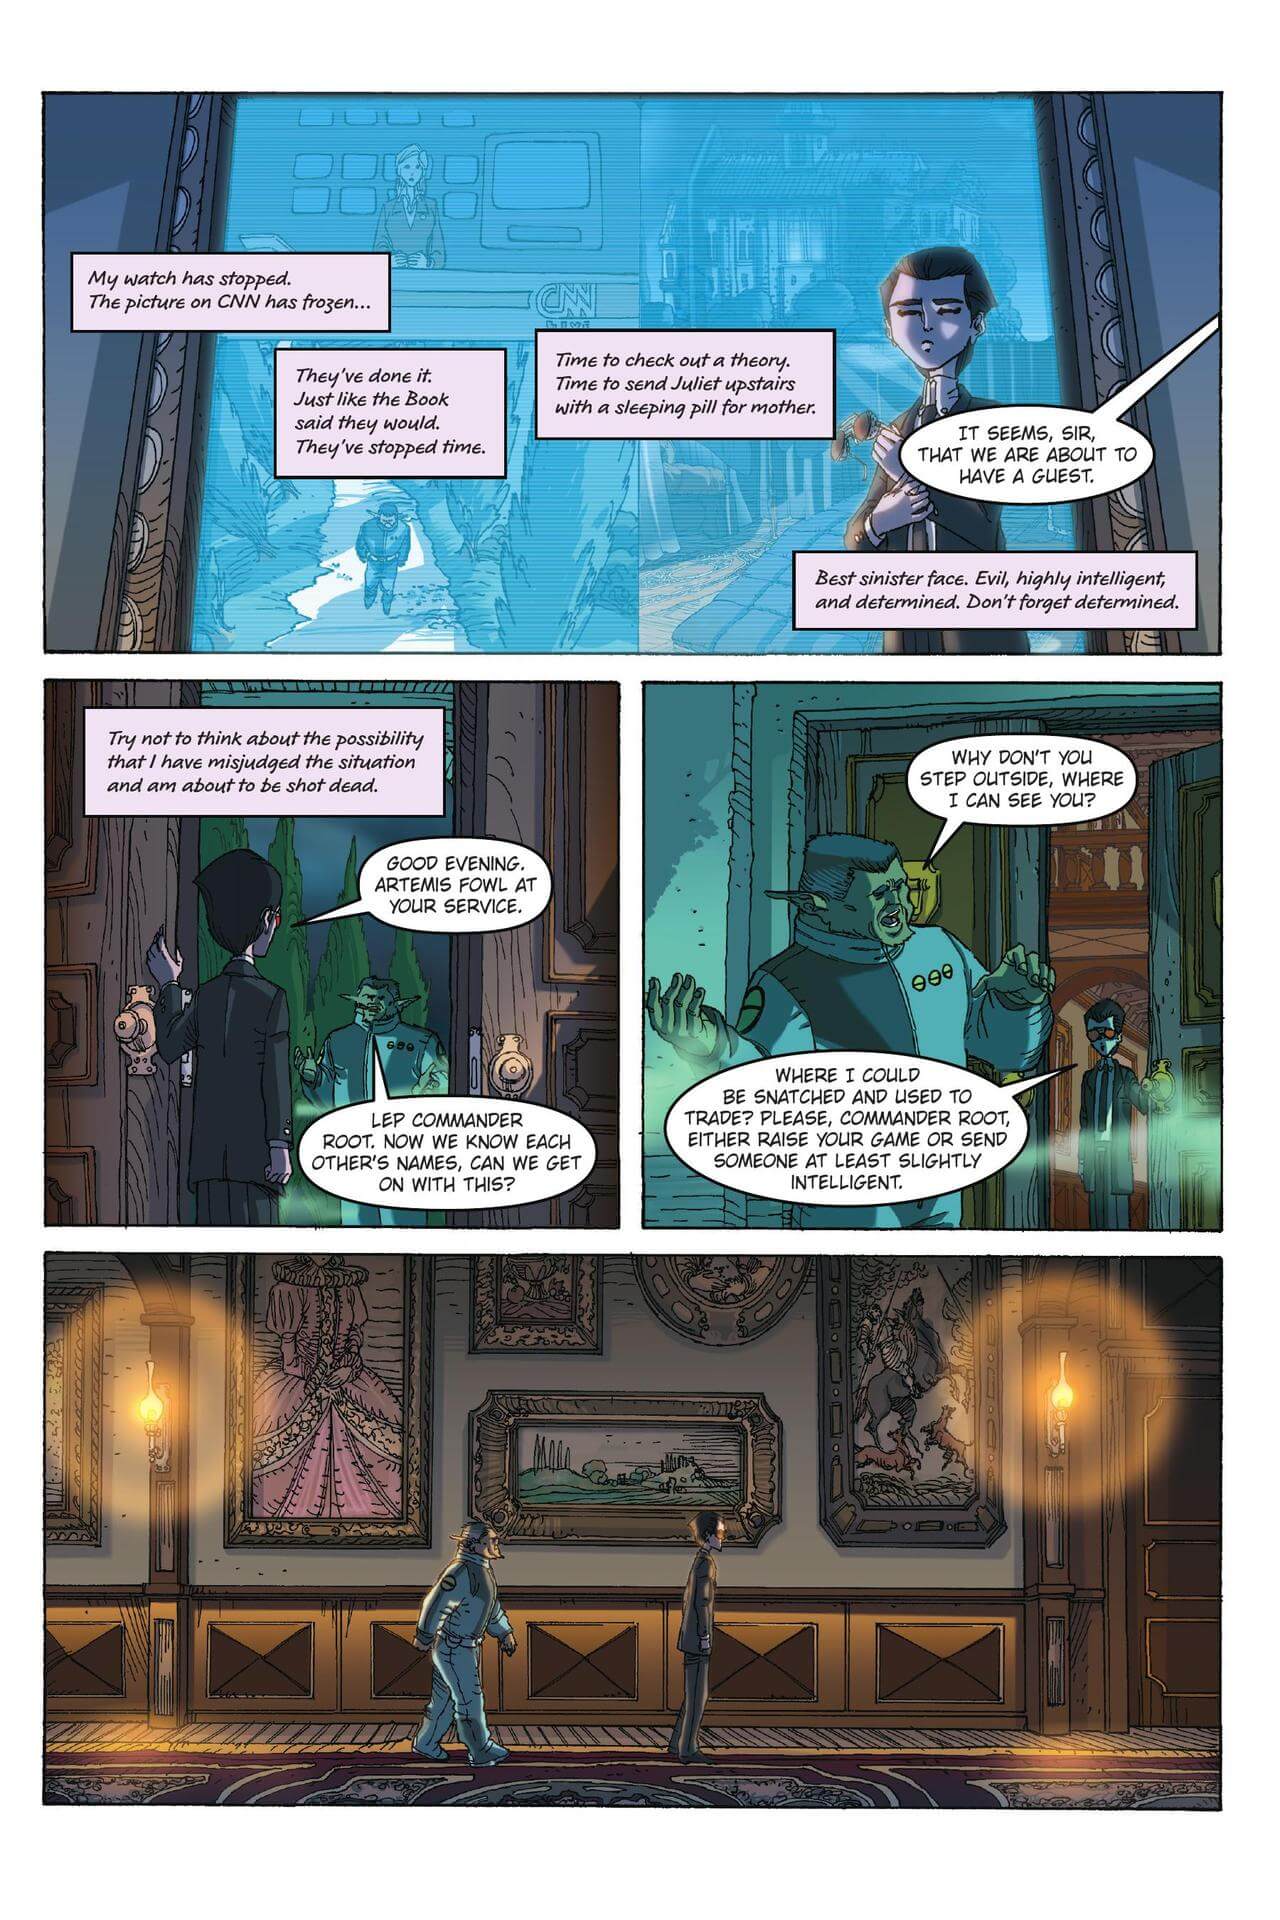 page 62 of artemis fowl the graphic novel